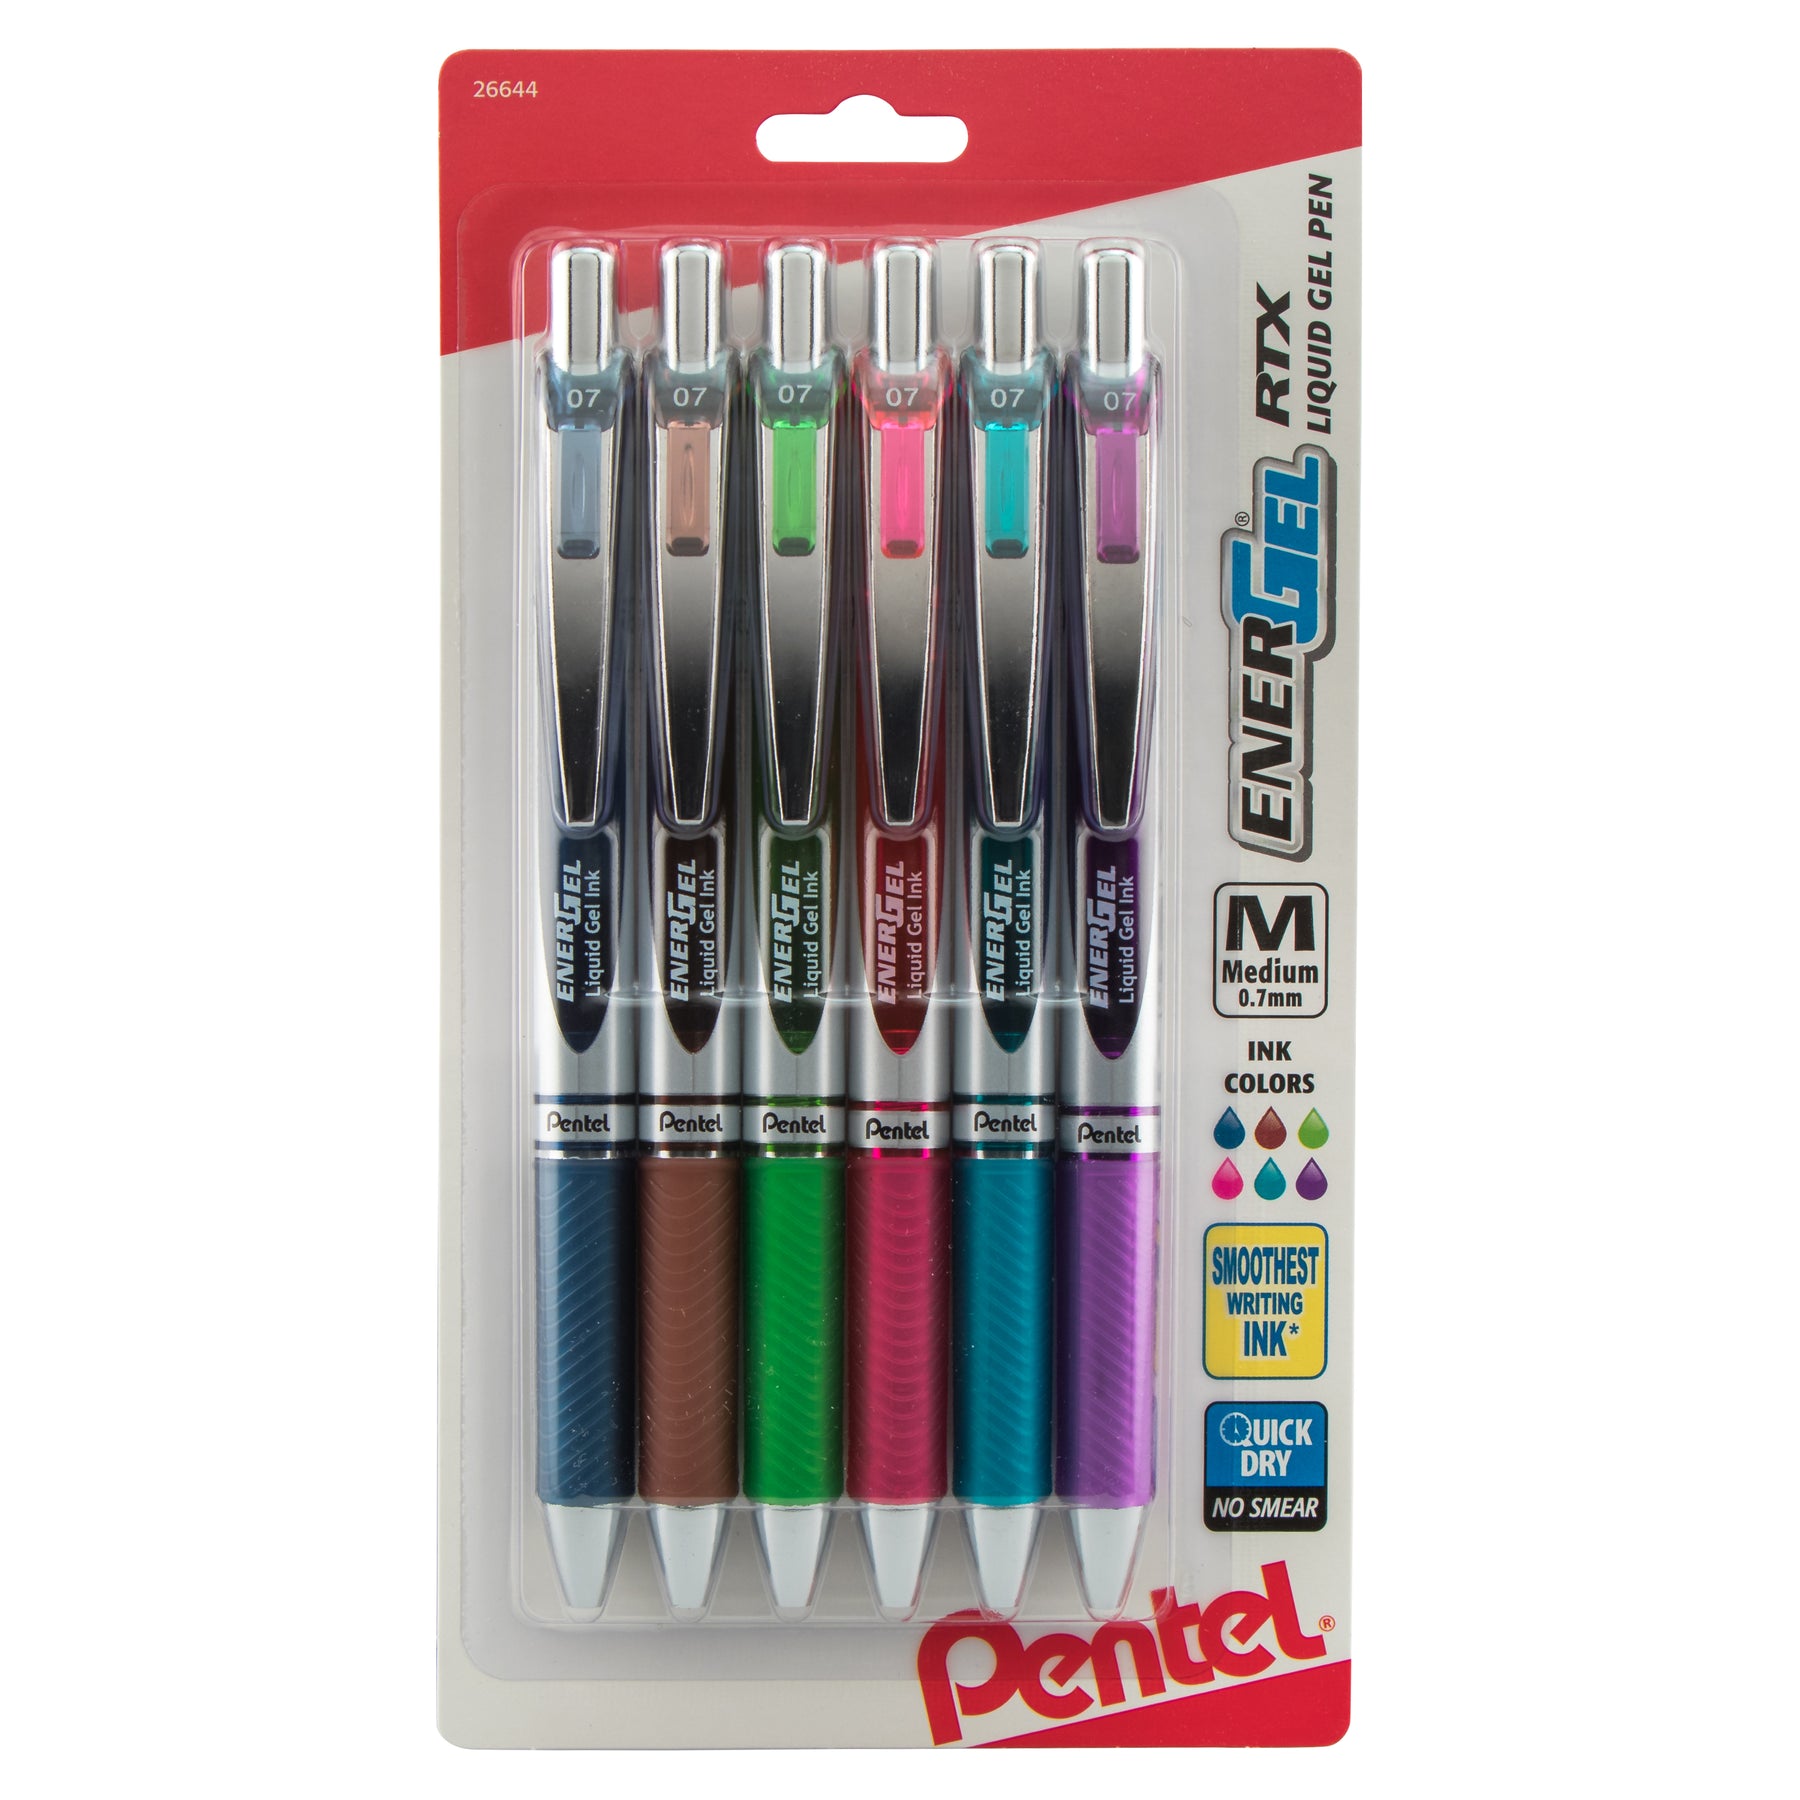 Instant Dry Rolling Ball Pens, No Smear No Bleed Gel Ink Pens